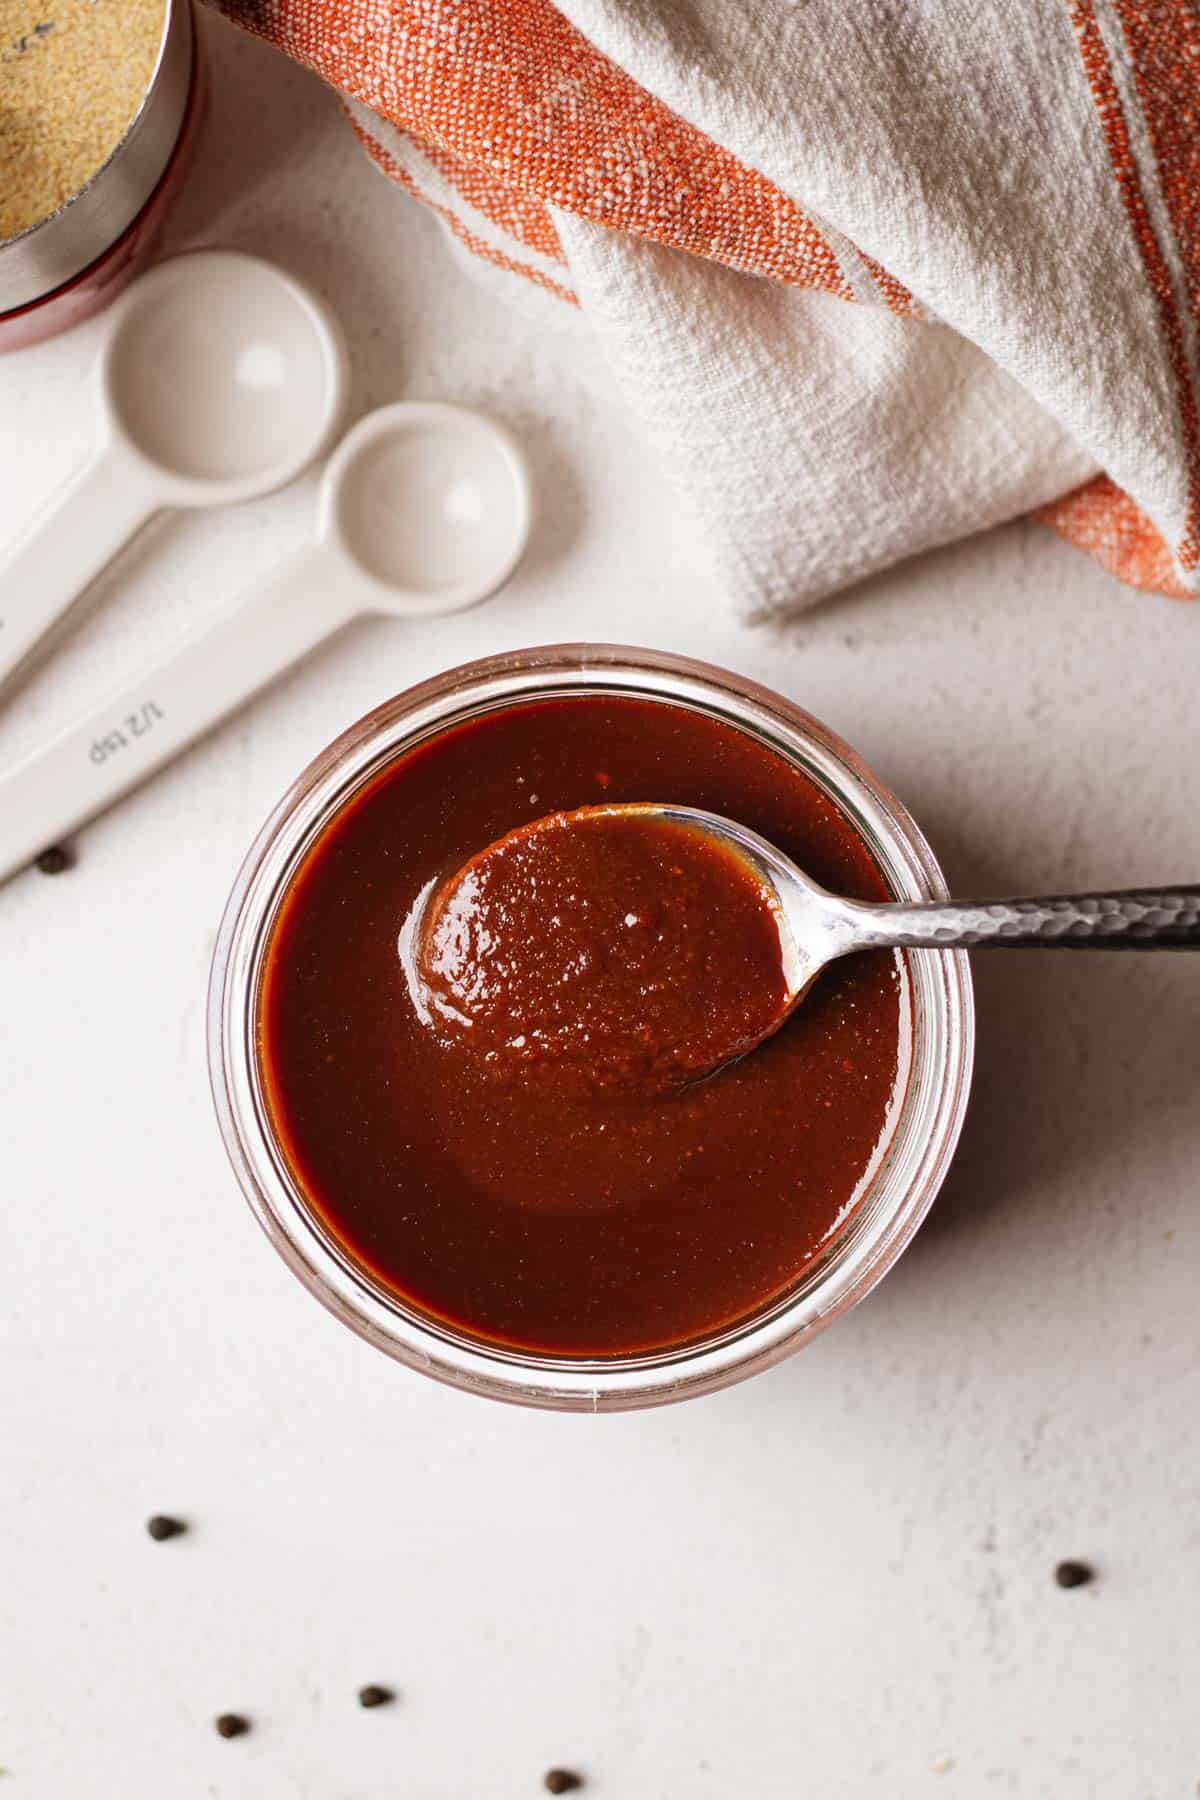 Overhead picture of a spoon being dipped in a jar of bbq sauce.